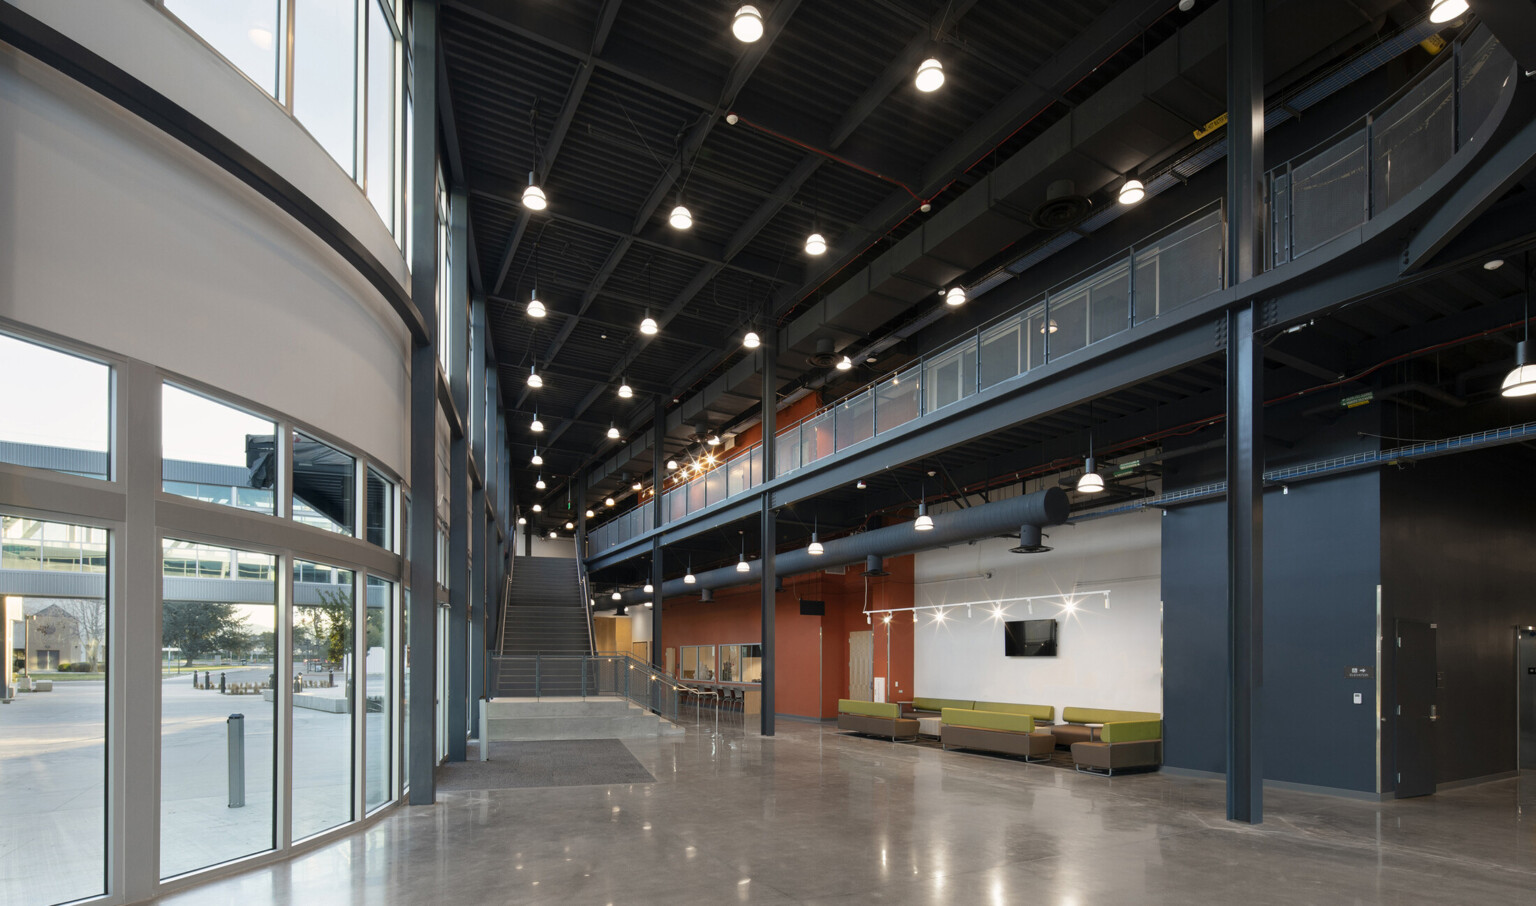 Interior of Fine Arts complex ground-floor, high ceilings, floor-to-ceiling windows, polished concrete flooring, open-floor concept promotes collaboration